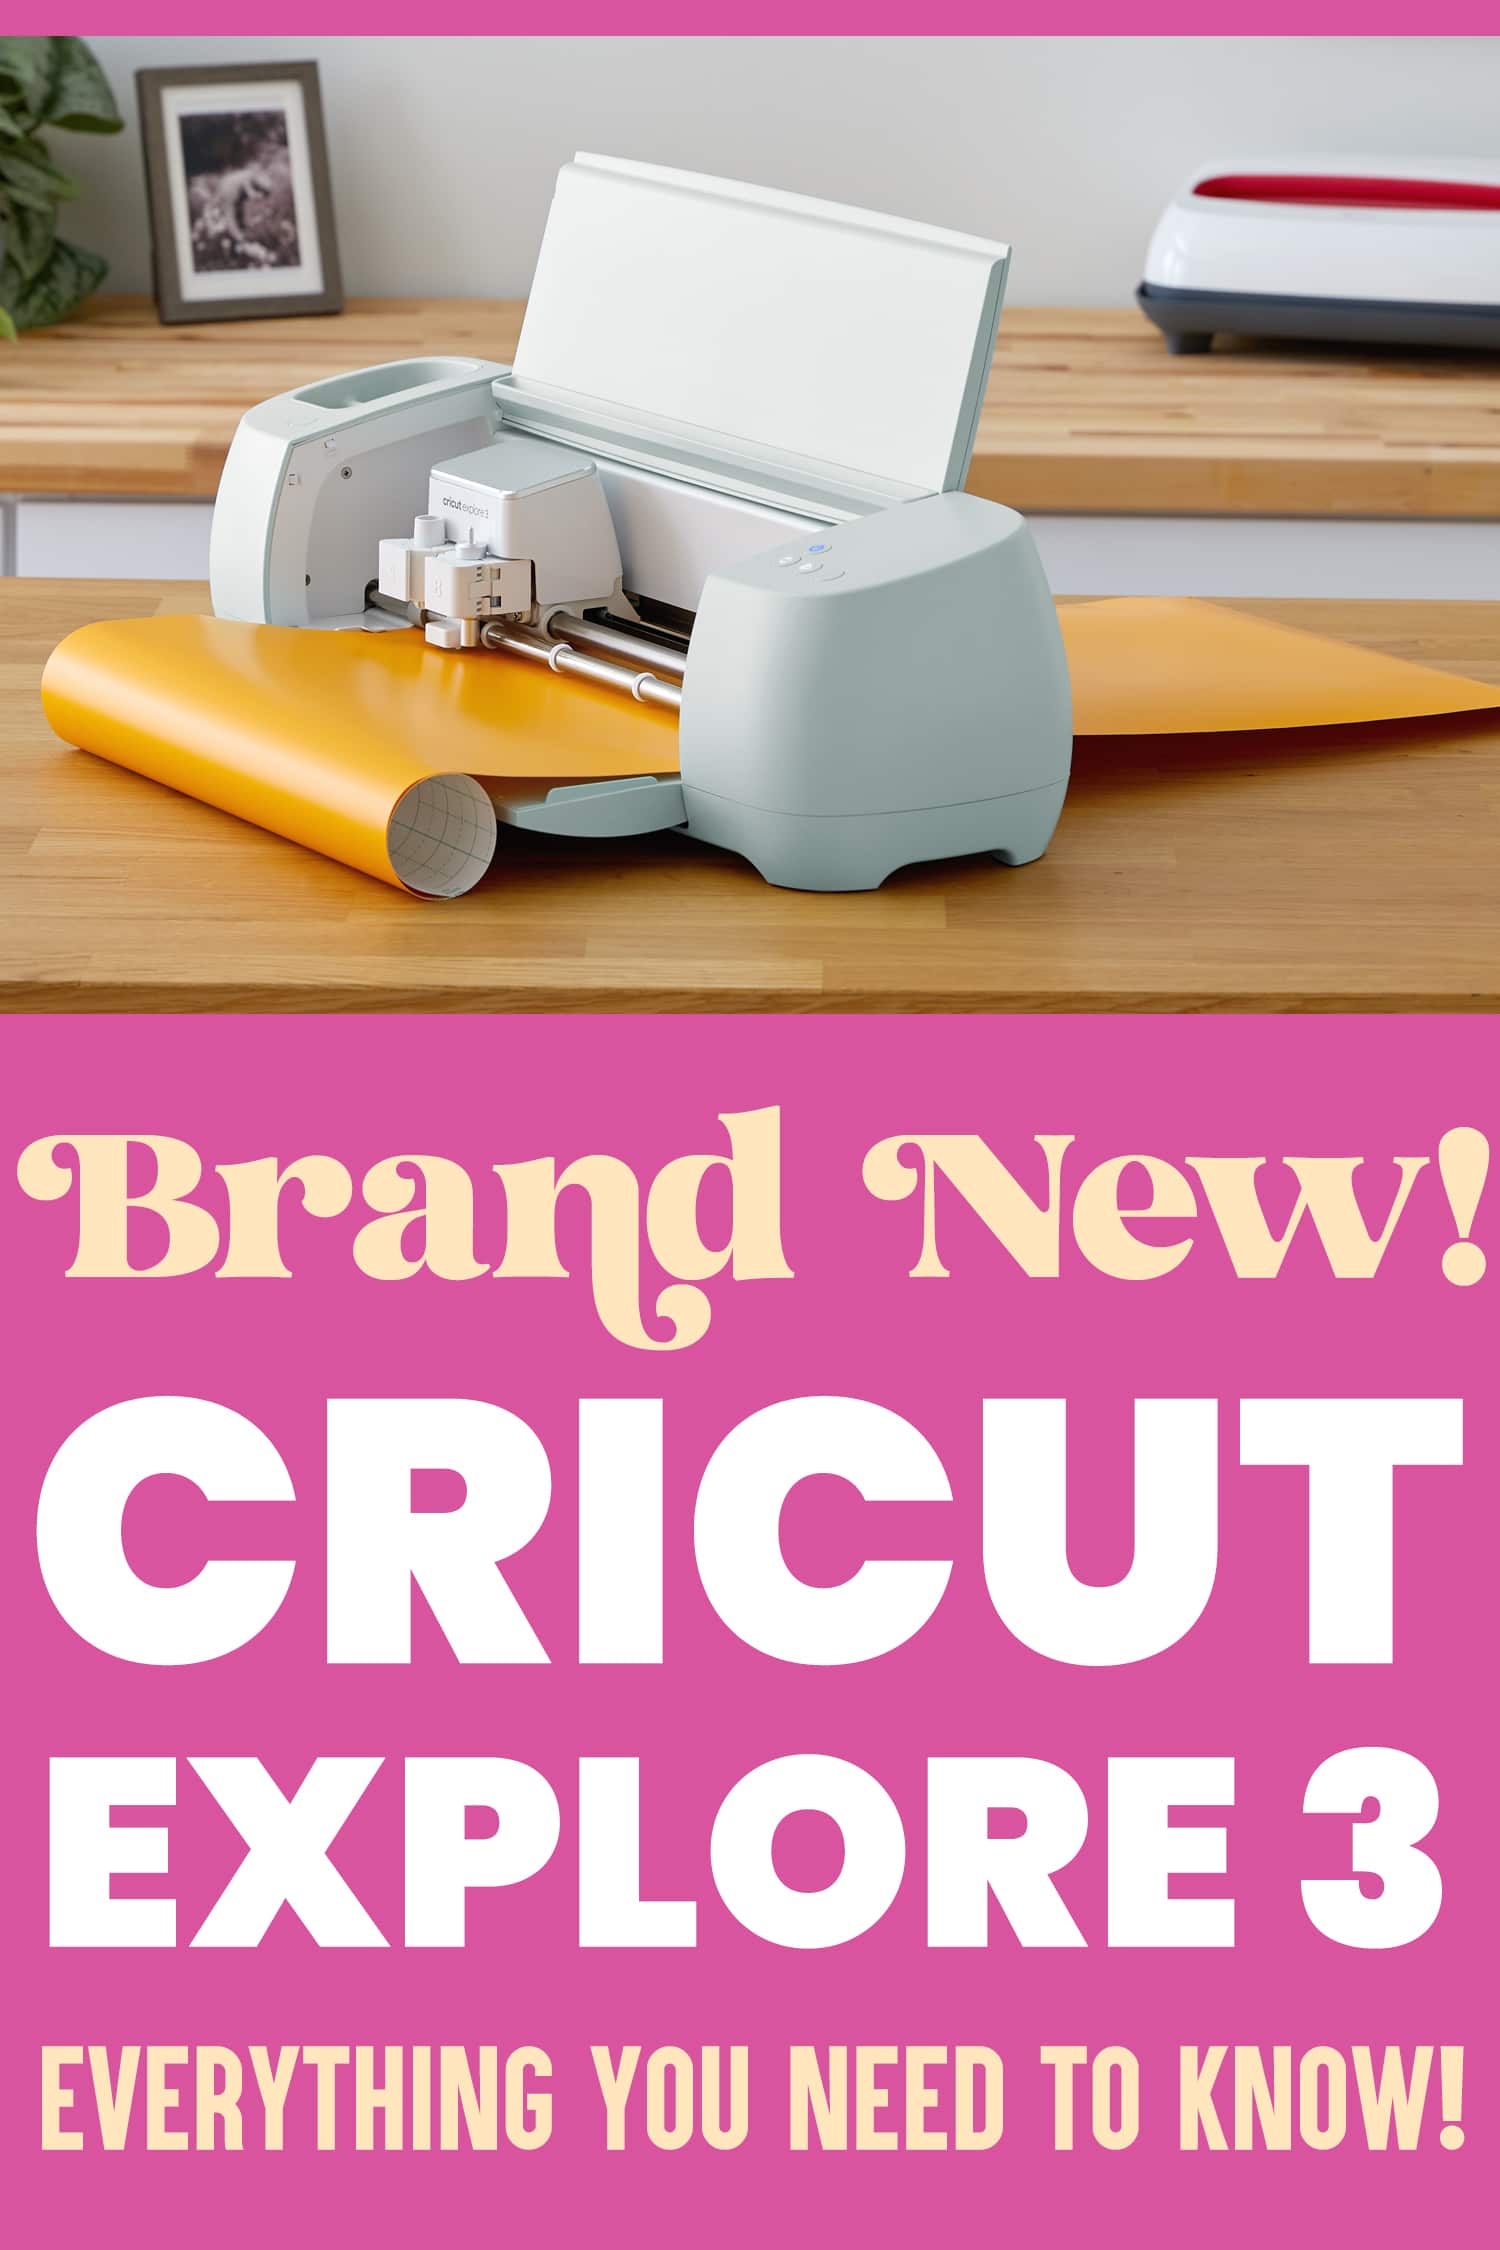 Cricut Explore 3 Review: Crafting Made Easier